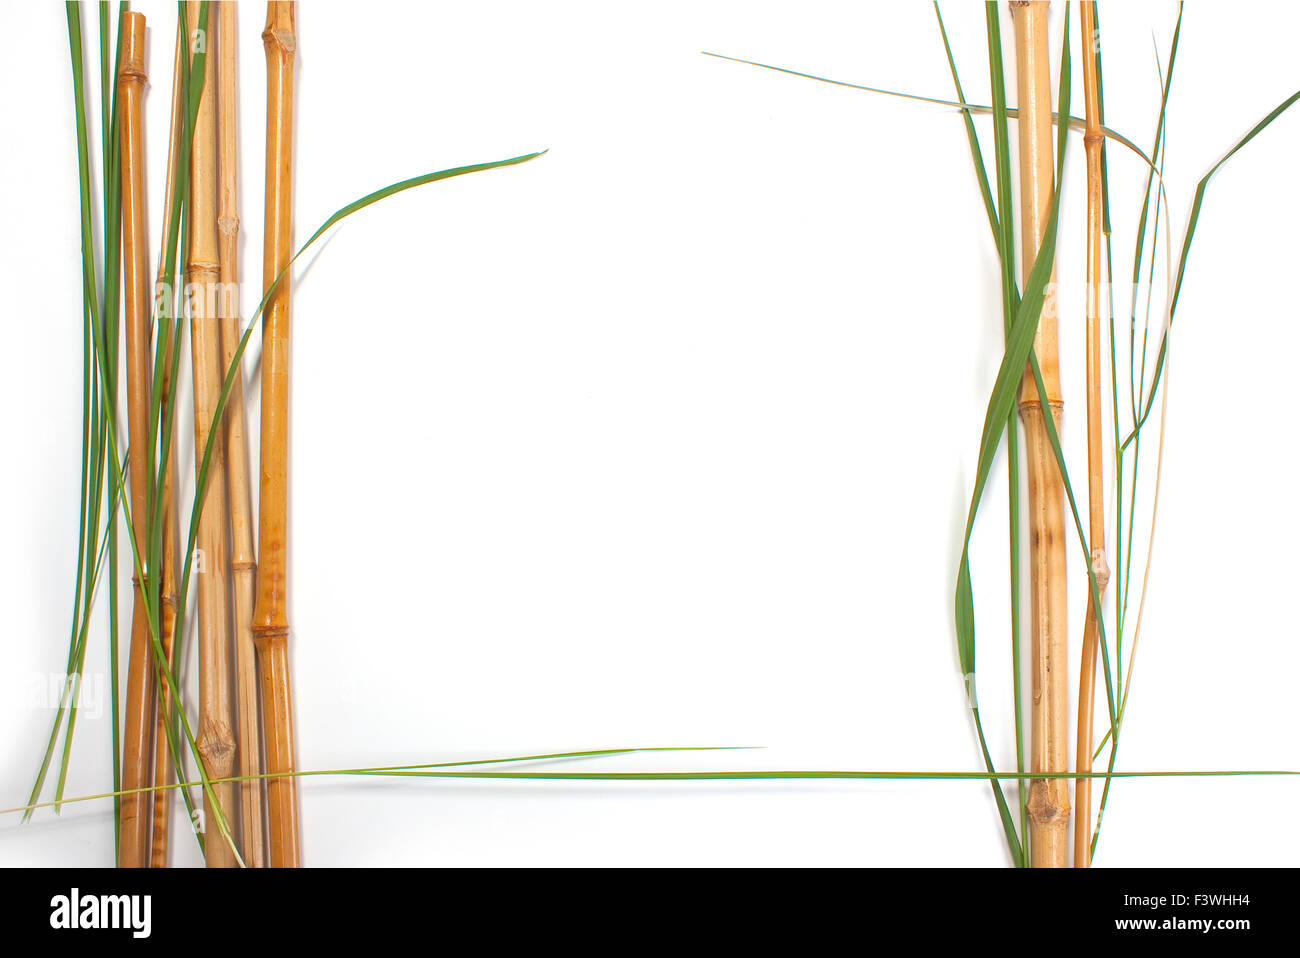 Frame from bamboo Stock Photo